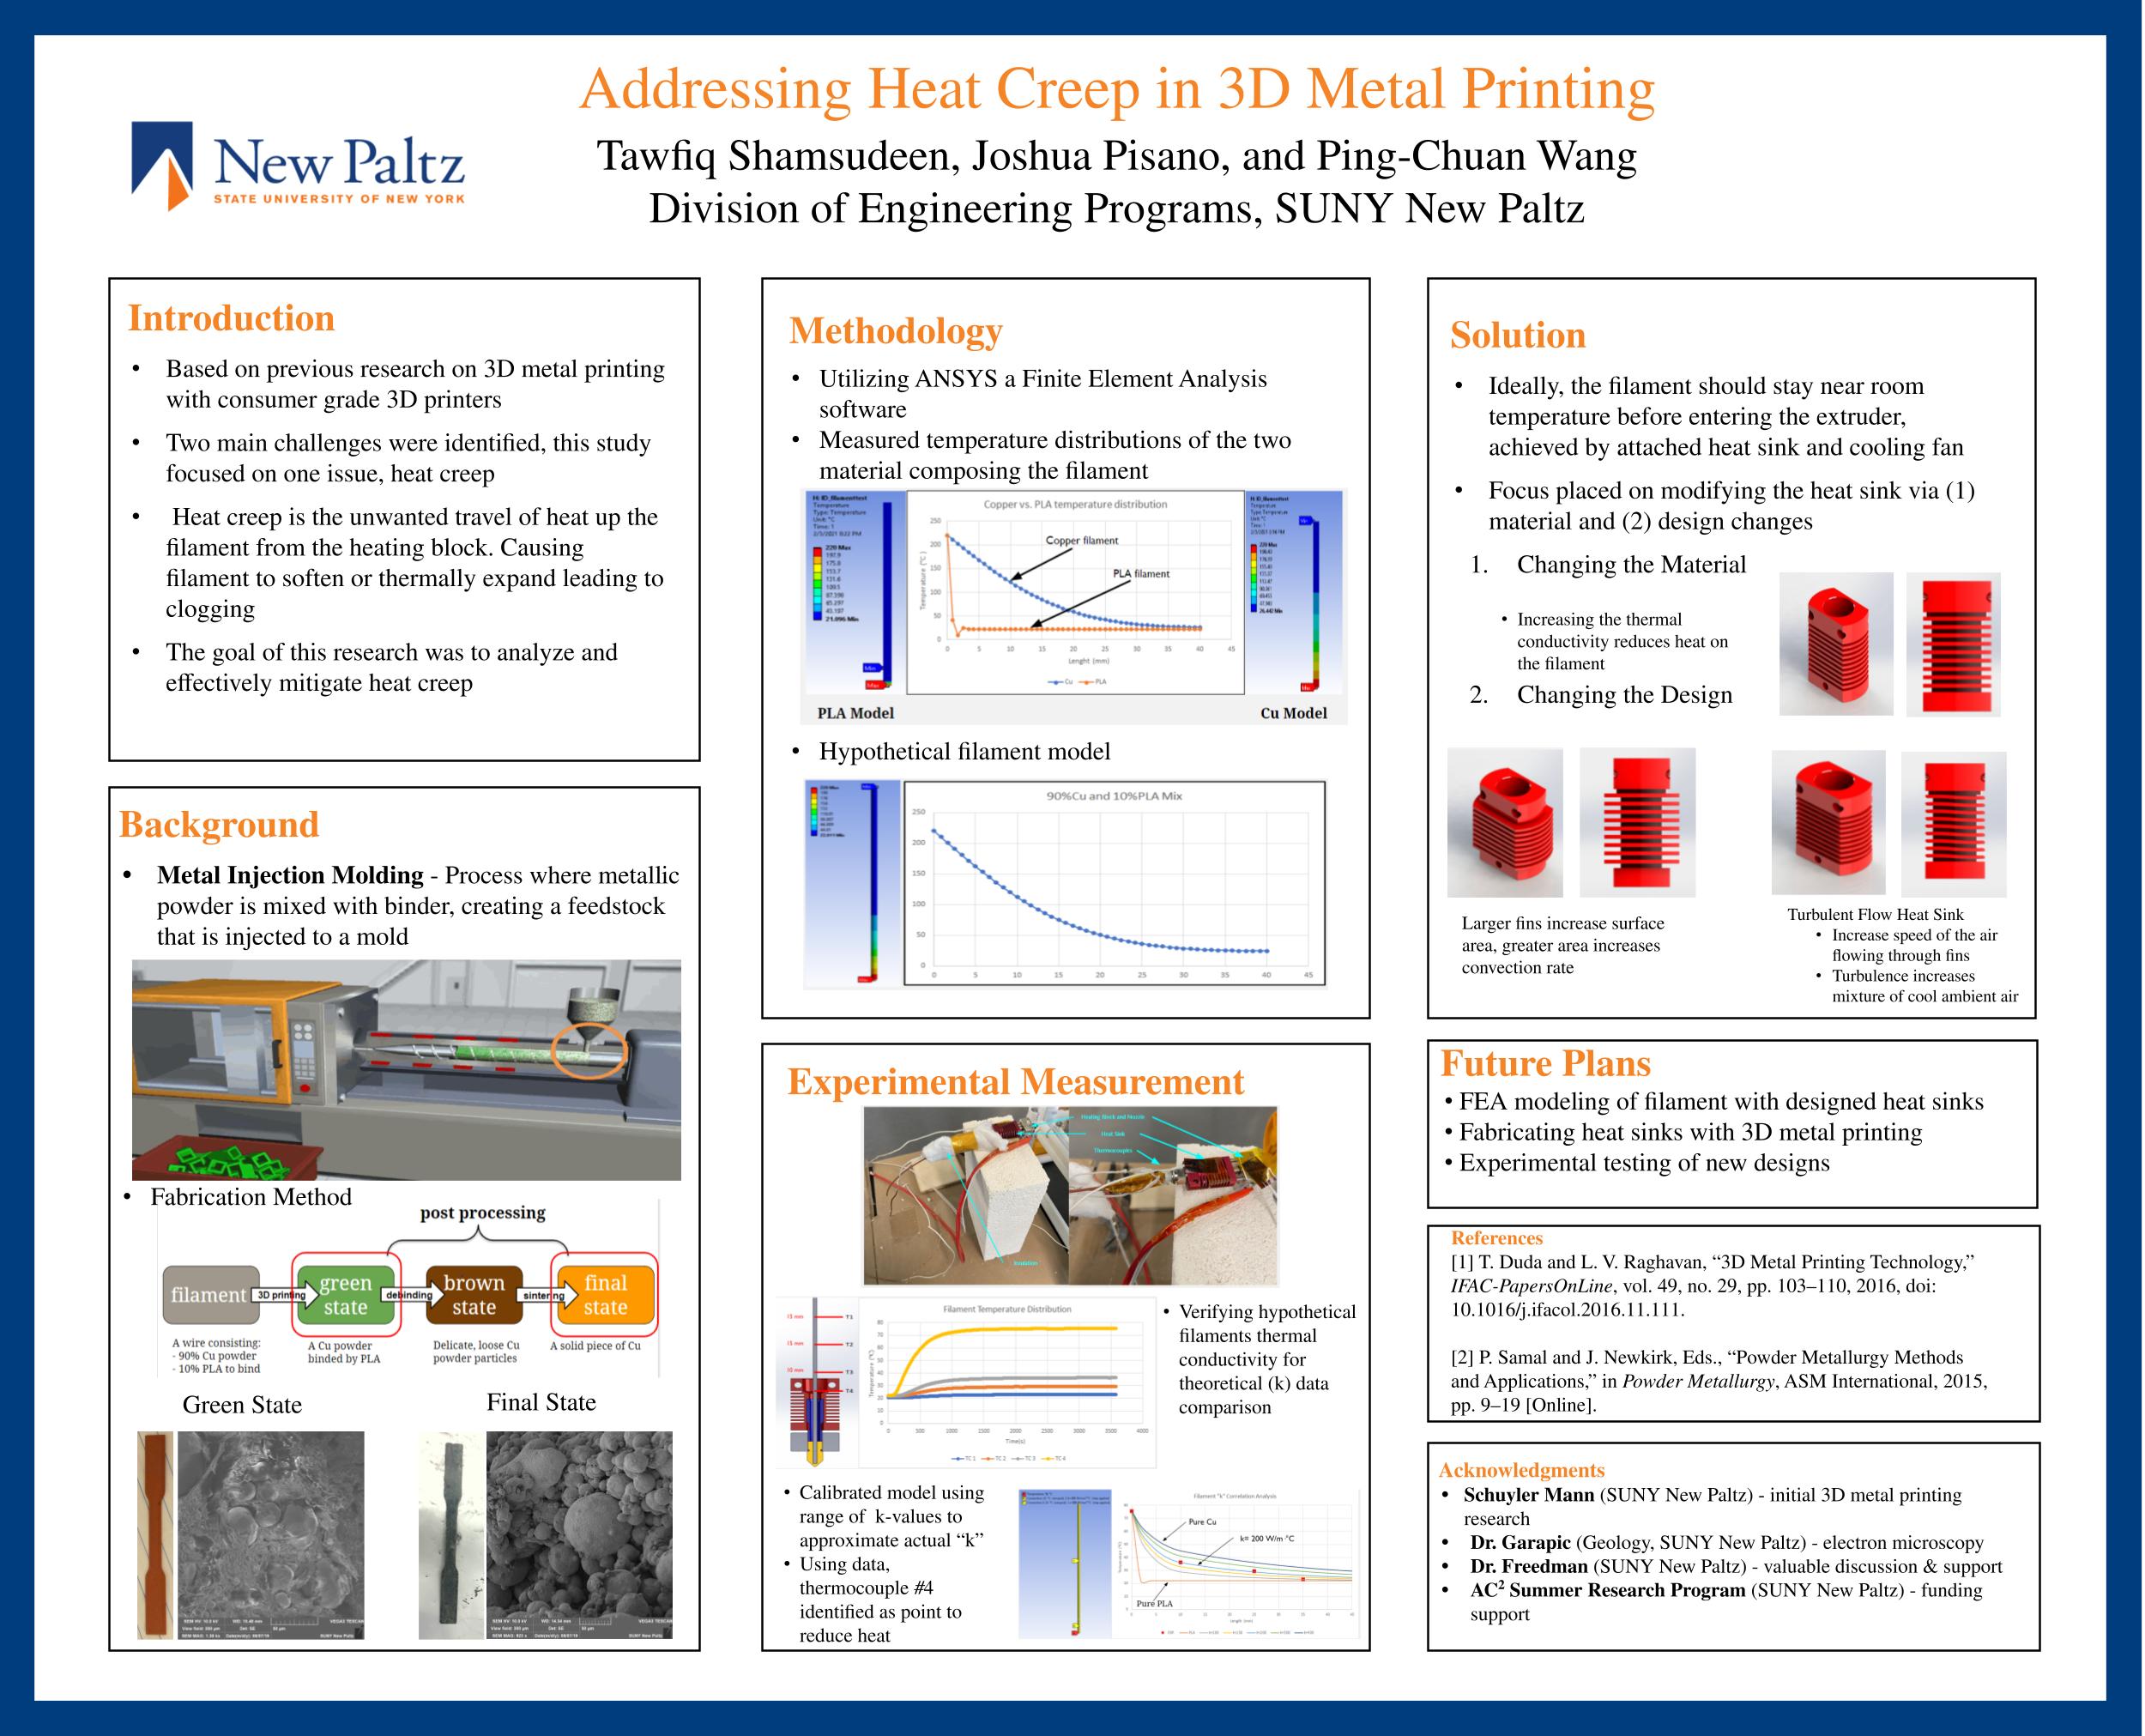 Showcase Image for Addressing Heat Creep in 3D Metal Printing